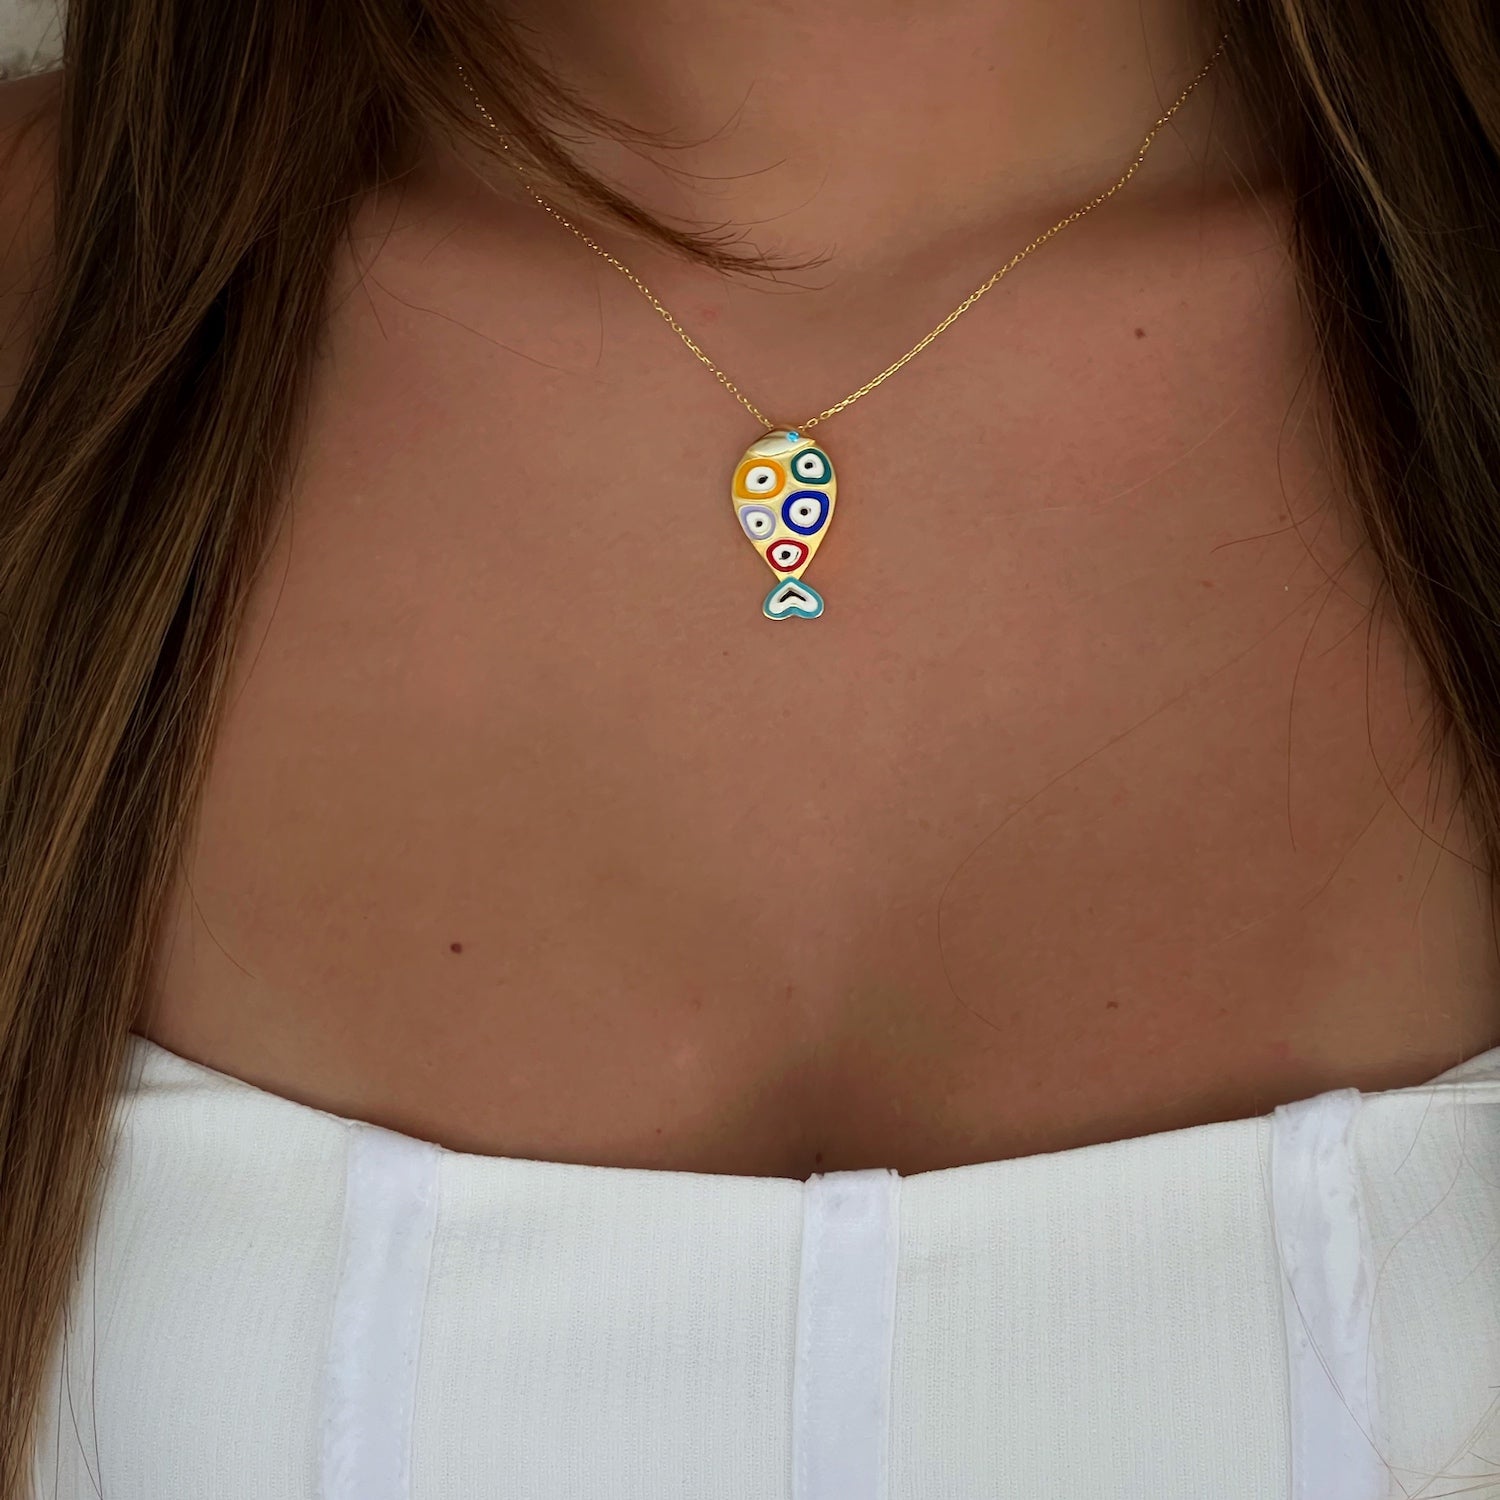 Close-up image of the Gold and Blue Evil Eye Fish Necklace, highlighting the intricate fish pendant with blue enamel and the surrounding evil eye designs.